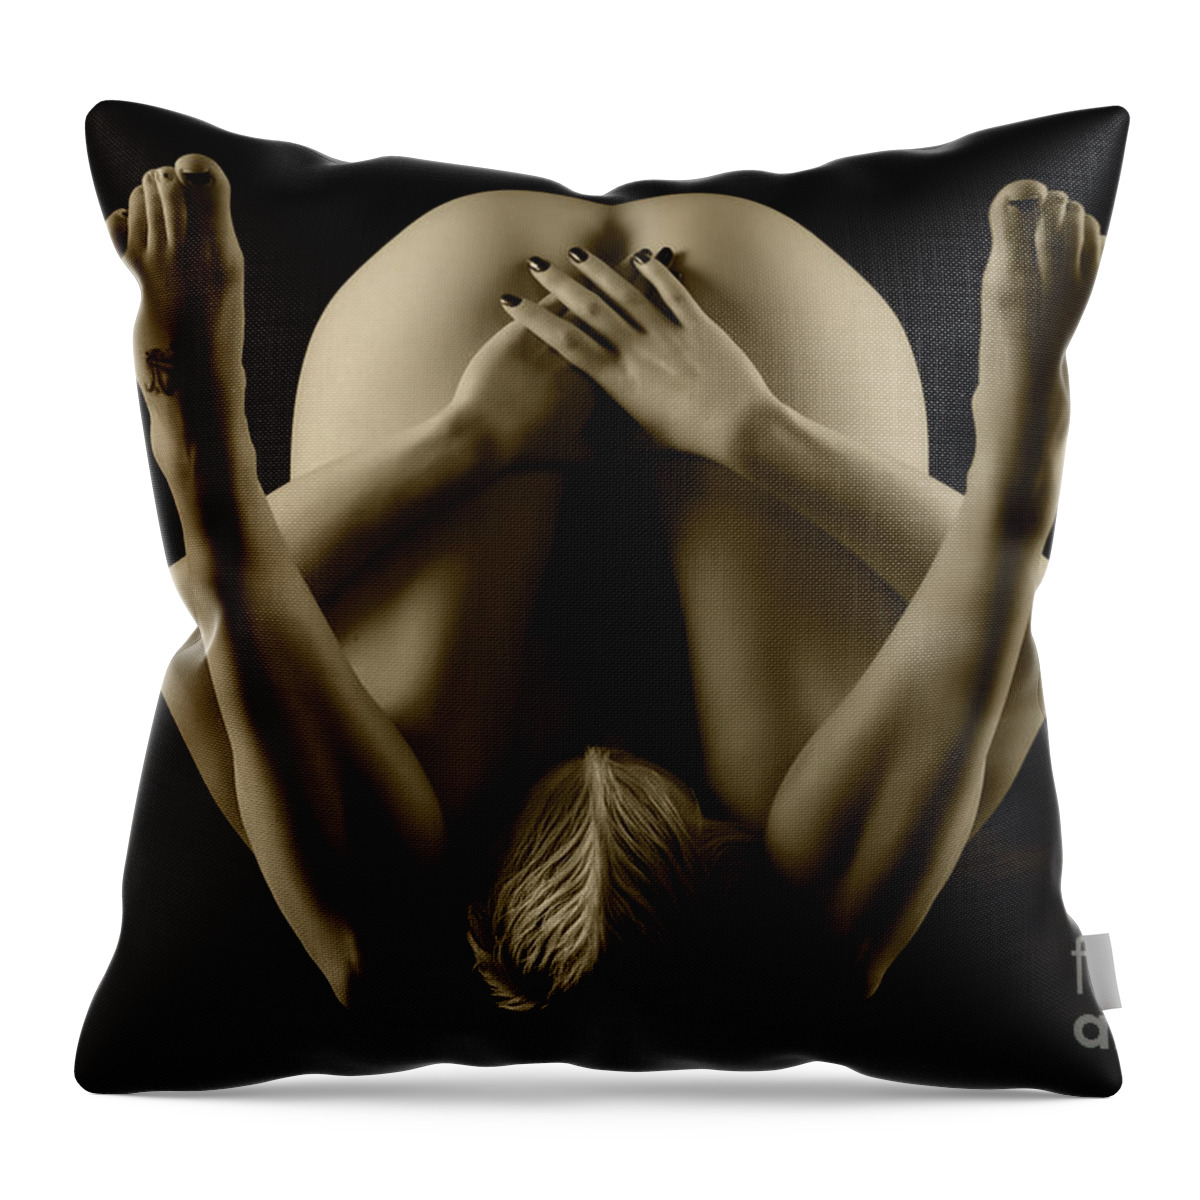 Artistic Photographs Throw Pillow featuring the photograph Locked up tight by Robert WK Clark